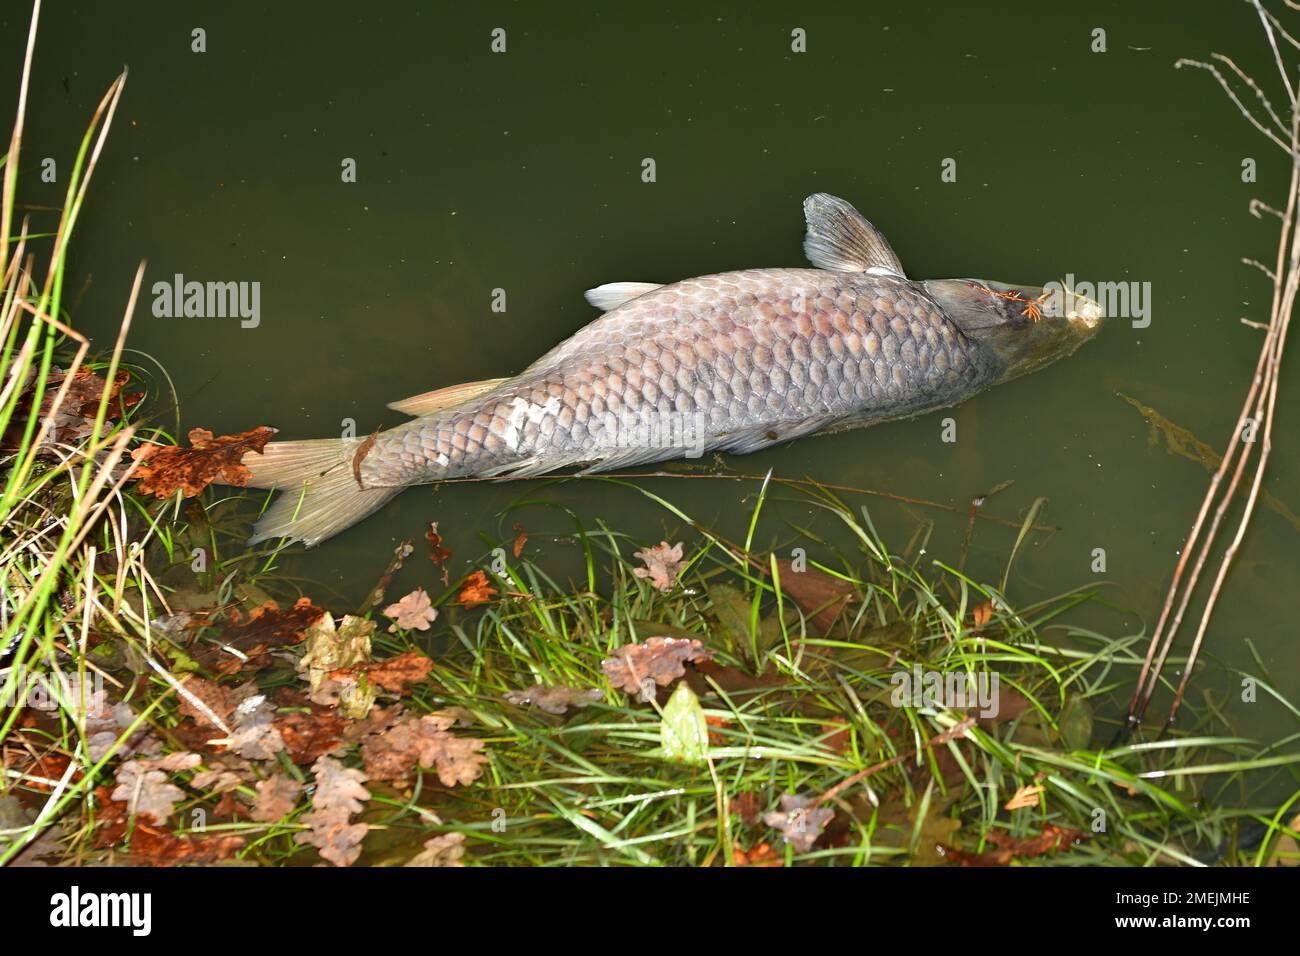 A dead fish floating on the water surface Stock Photo